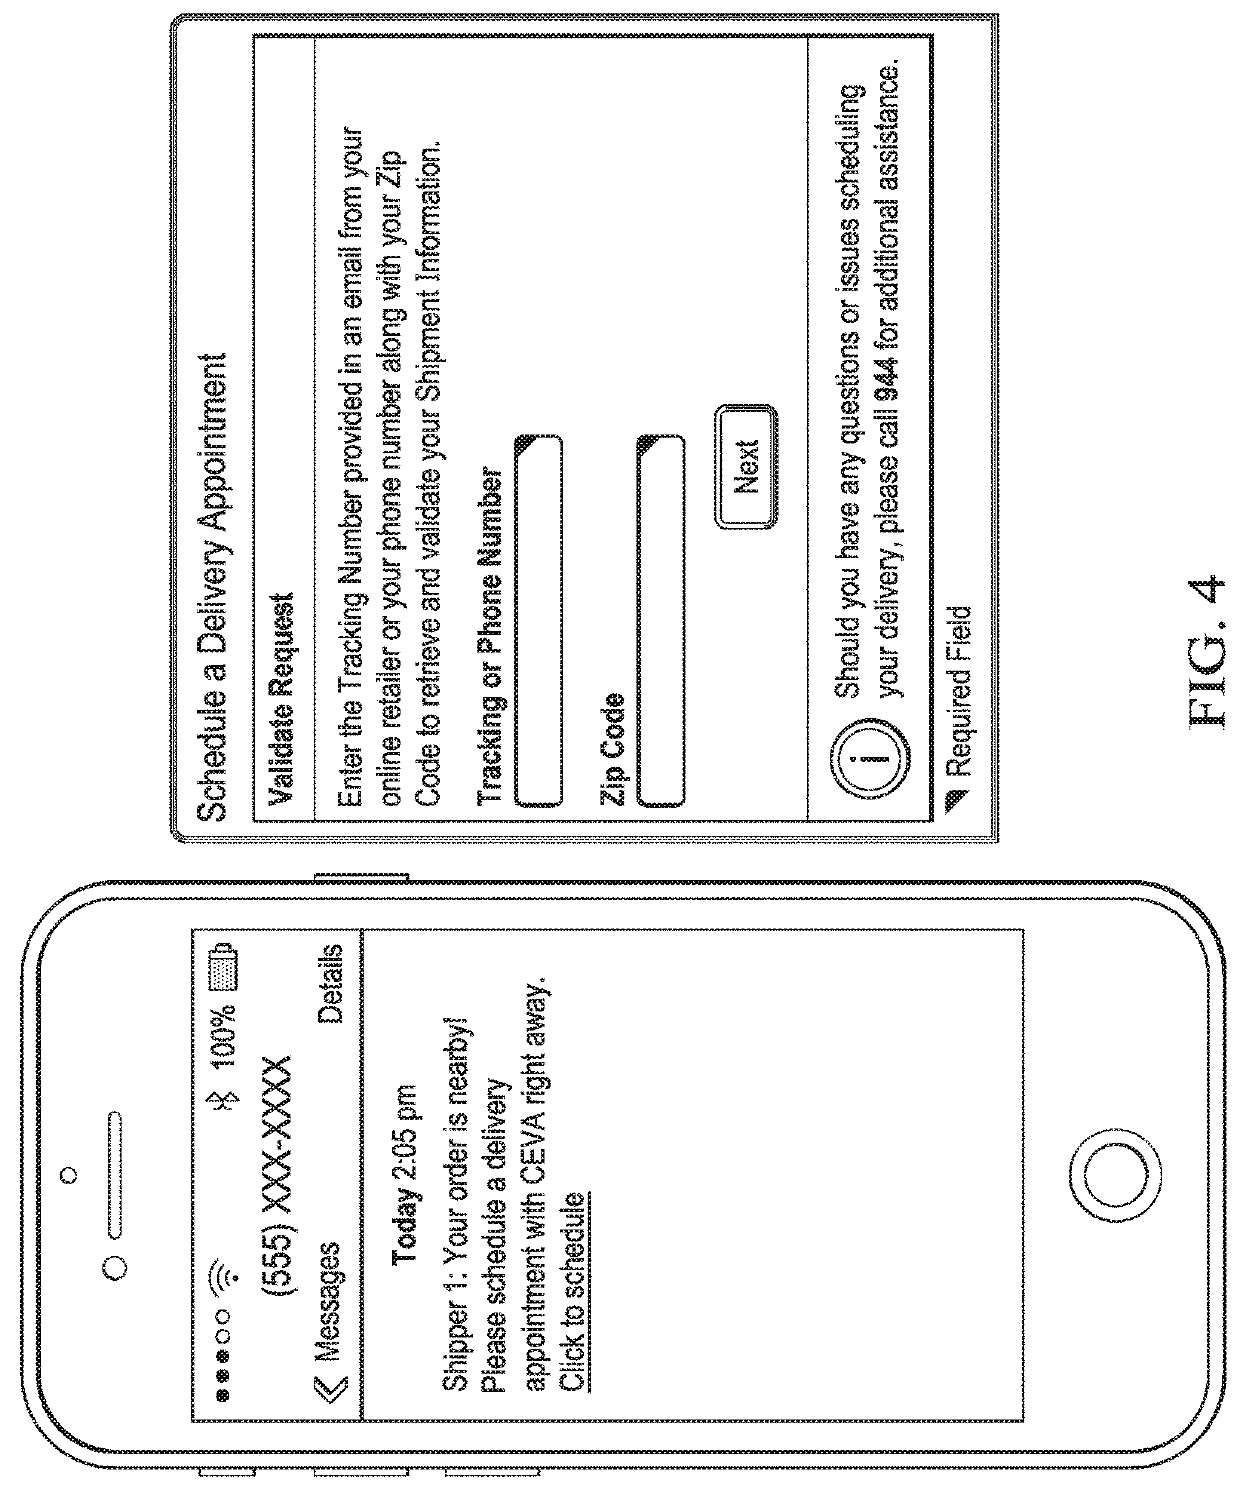 Systems and methods for predictive in-transit shipment delivery exception notification and automated resolution